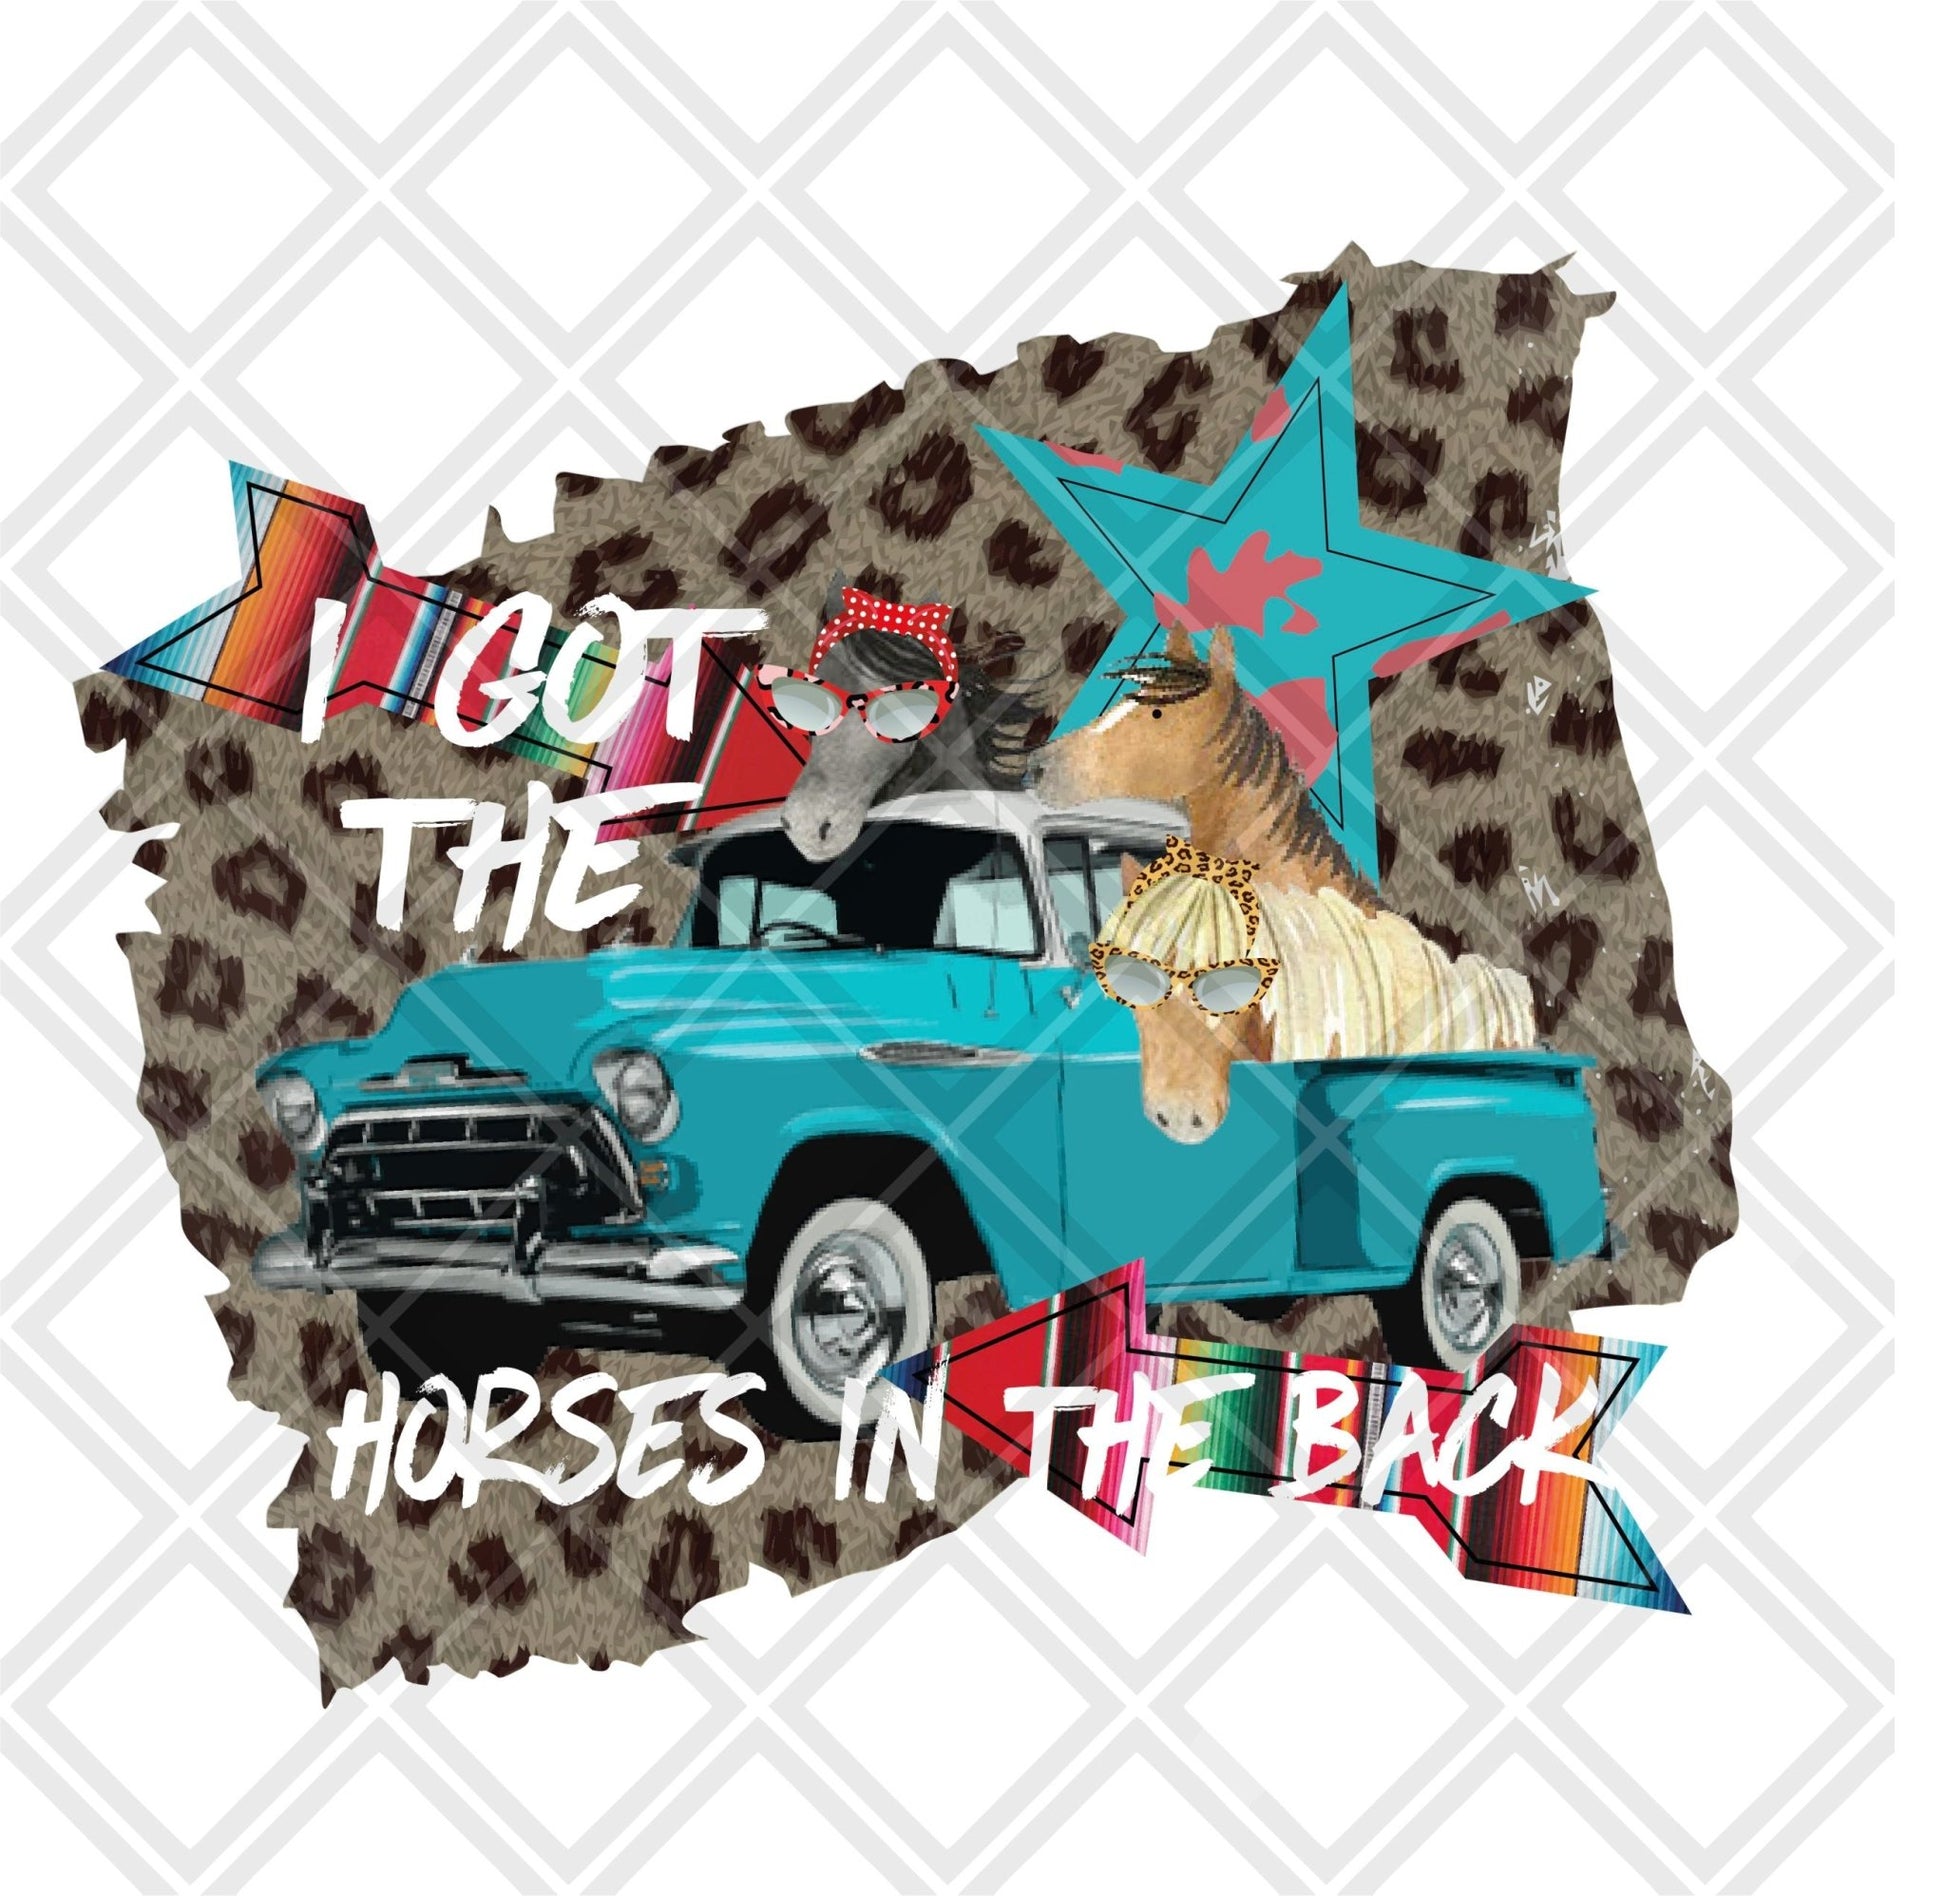 I got the horses in the back png Digital Download Instand Download - Do it yourself Transfers